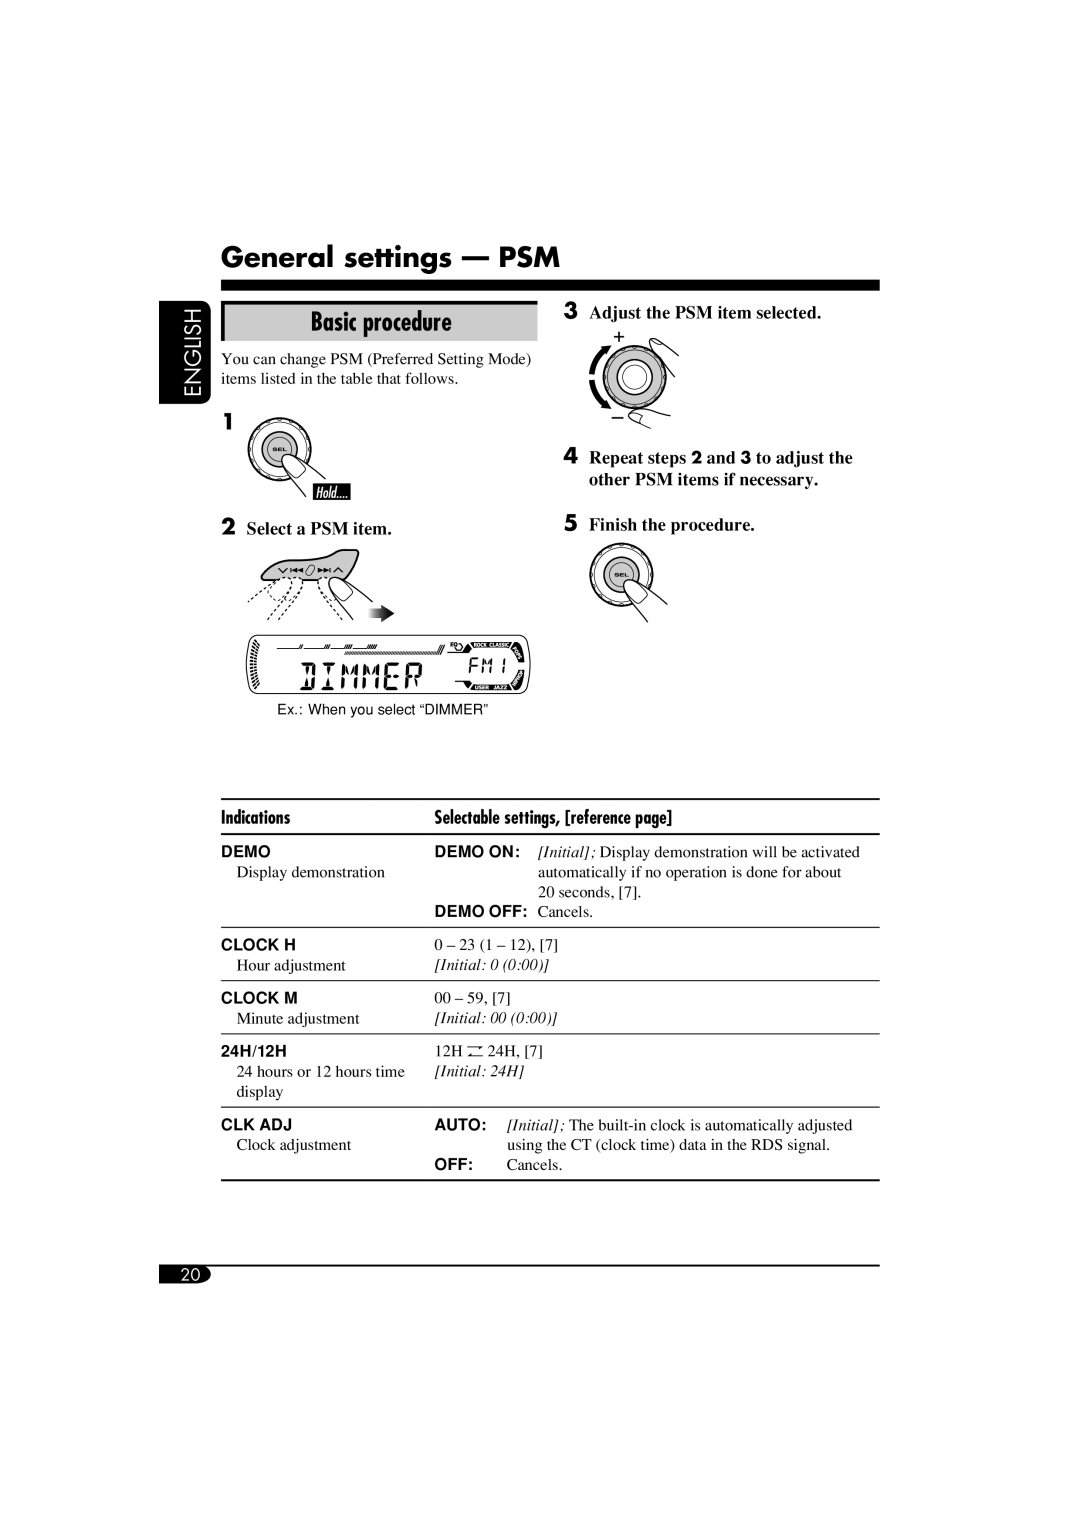 JVC KD-G411 General settings - PSM, Basic procedure, Adjust the PSM item selected, Select a PSM item, Finish the procedure 